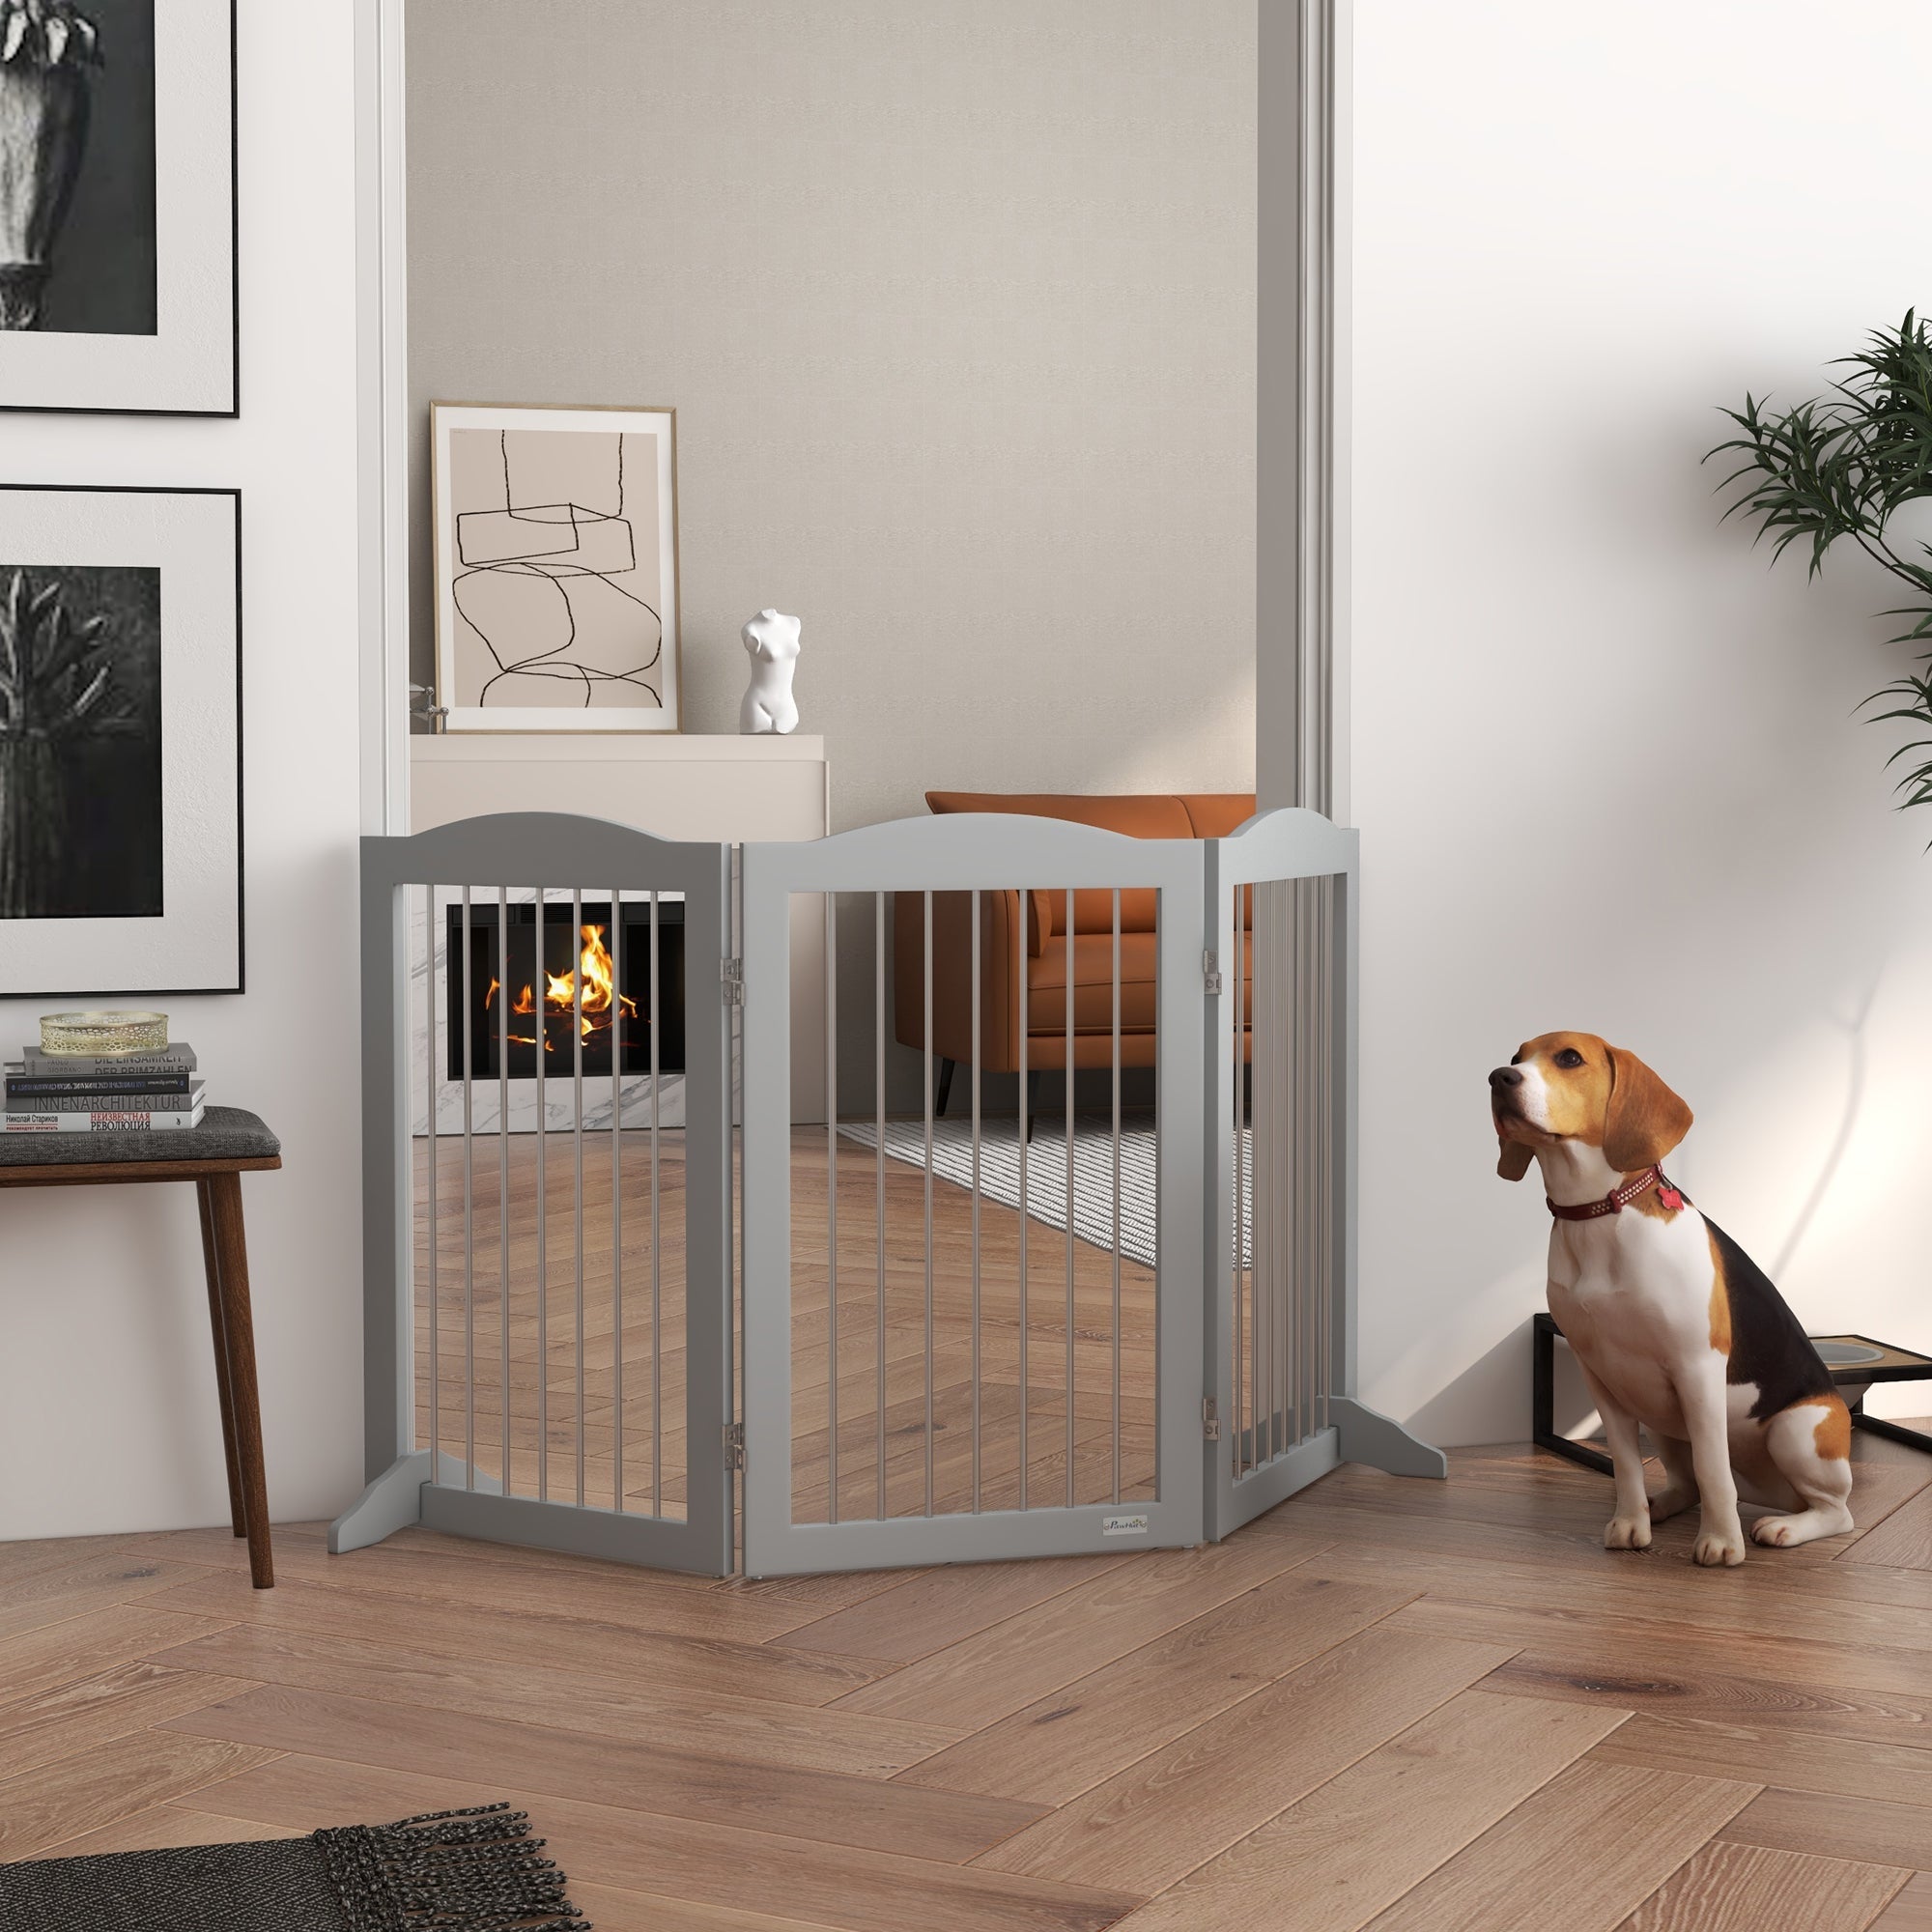 Foldable Dog Gate, Freestanding Pet Gate, with Two Support Feet, for Staircases, Hallways, Doorways - Grey-1